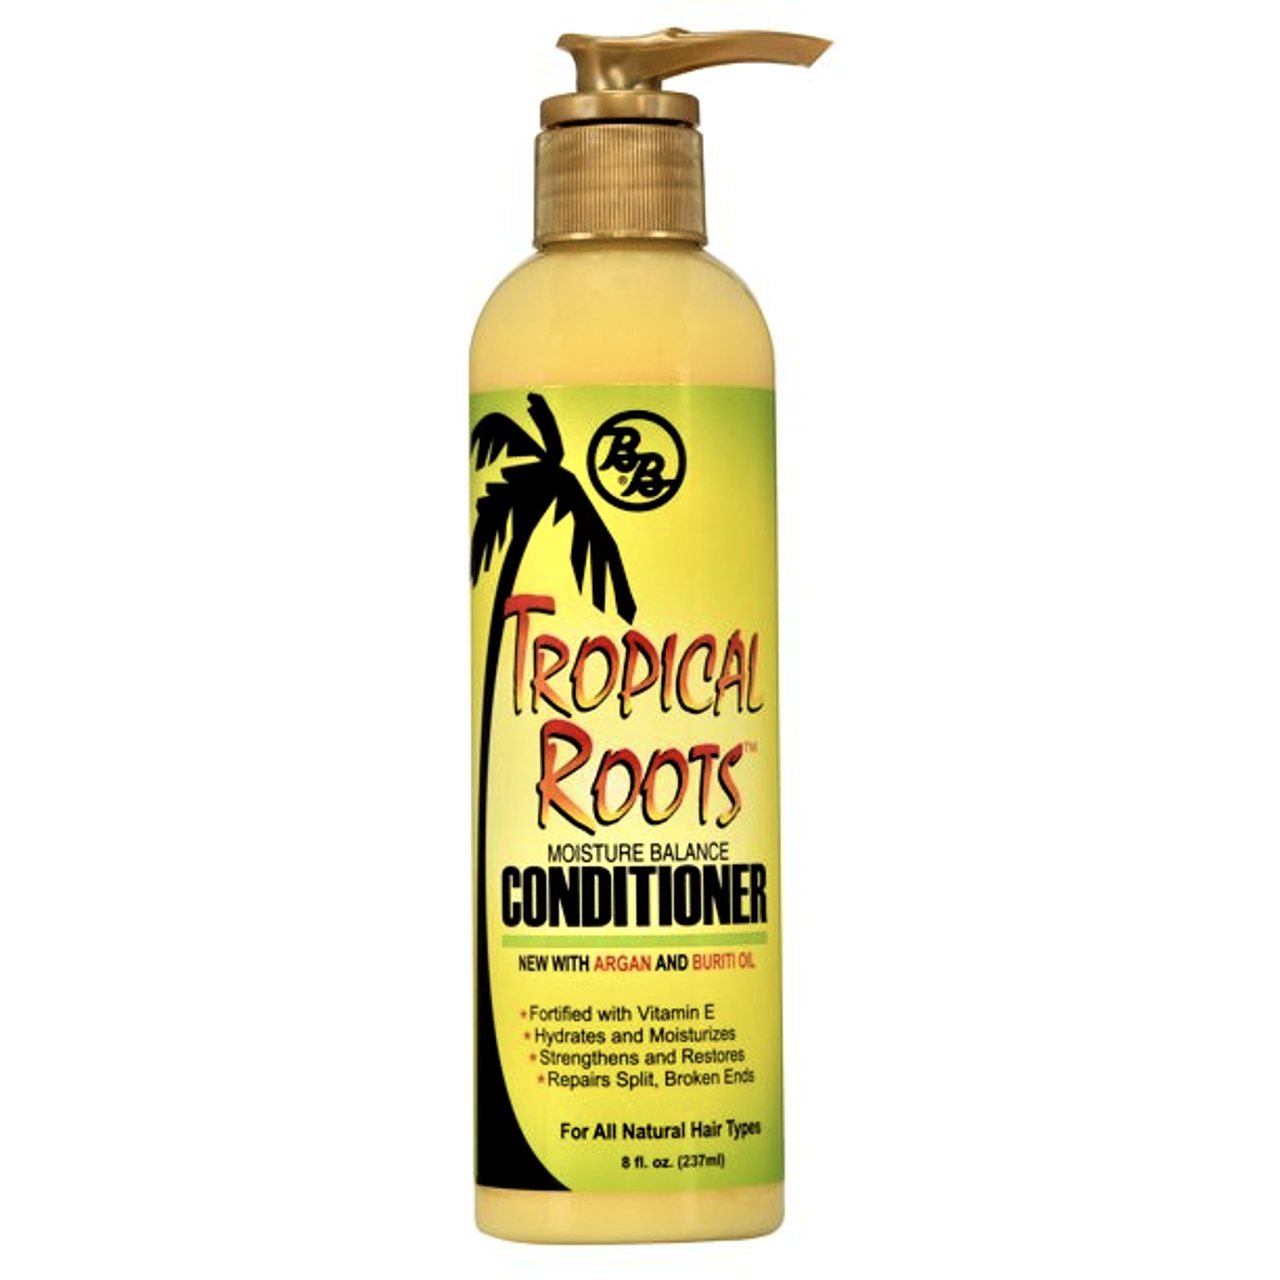 Tropical Roots Moisture Balance Conditioner